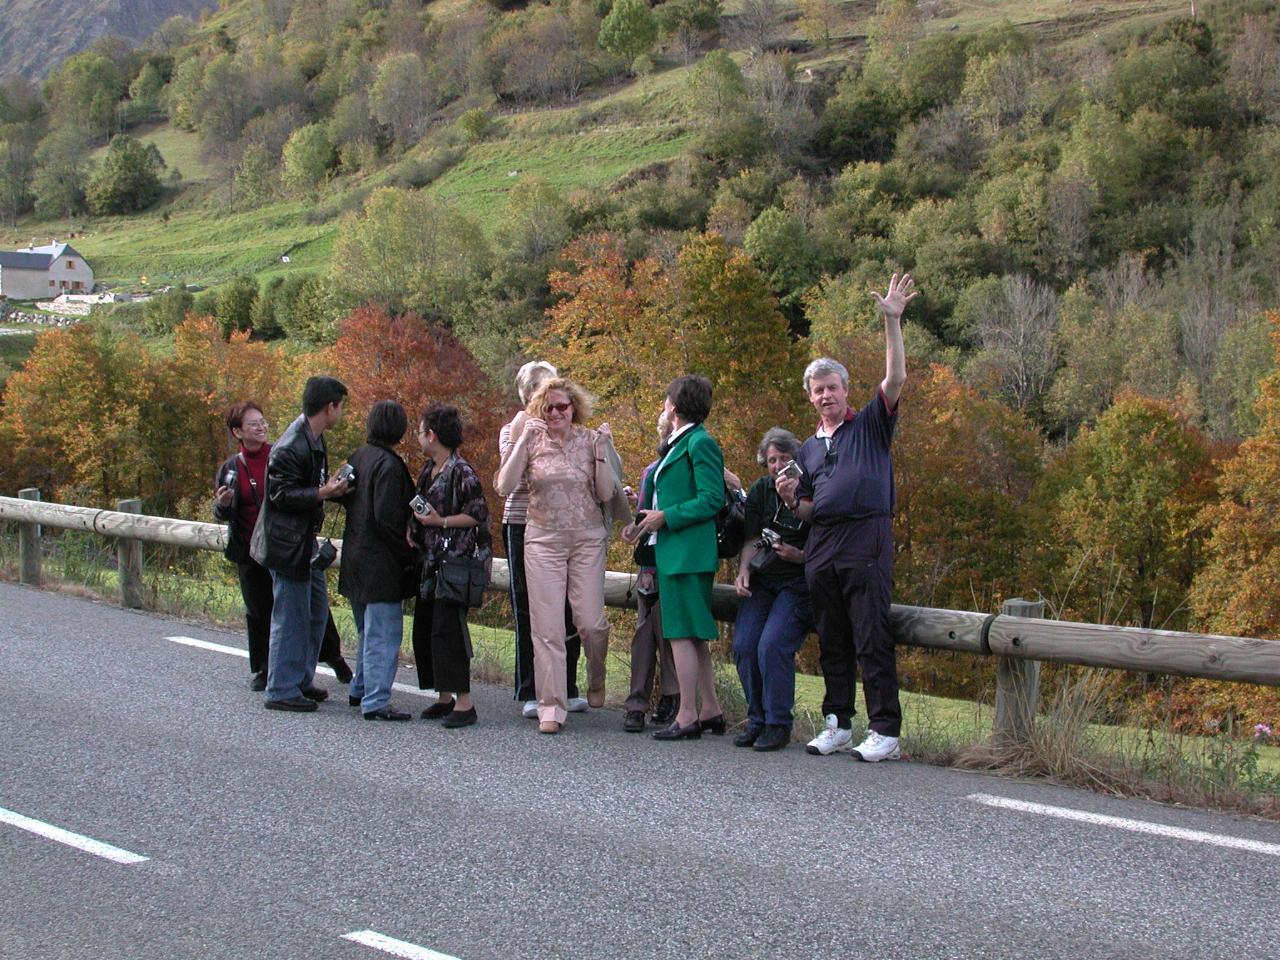 Some of Group N at Chaubère, France